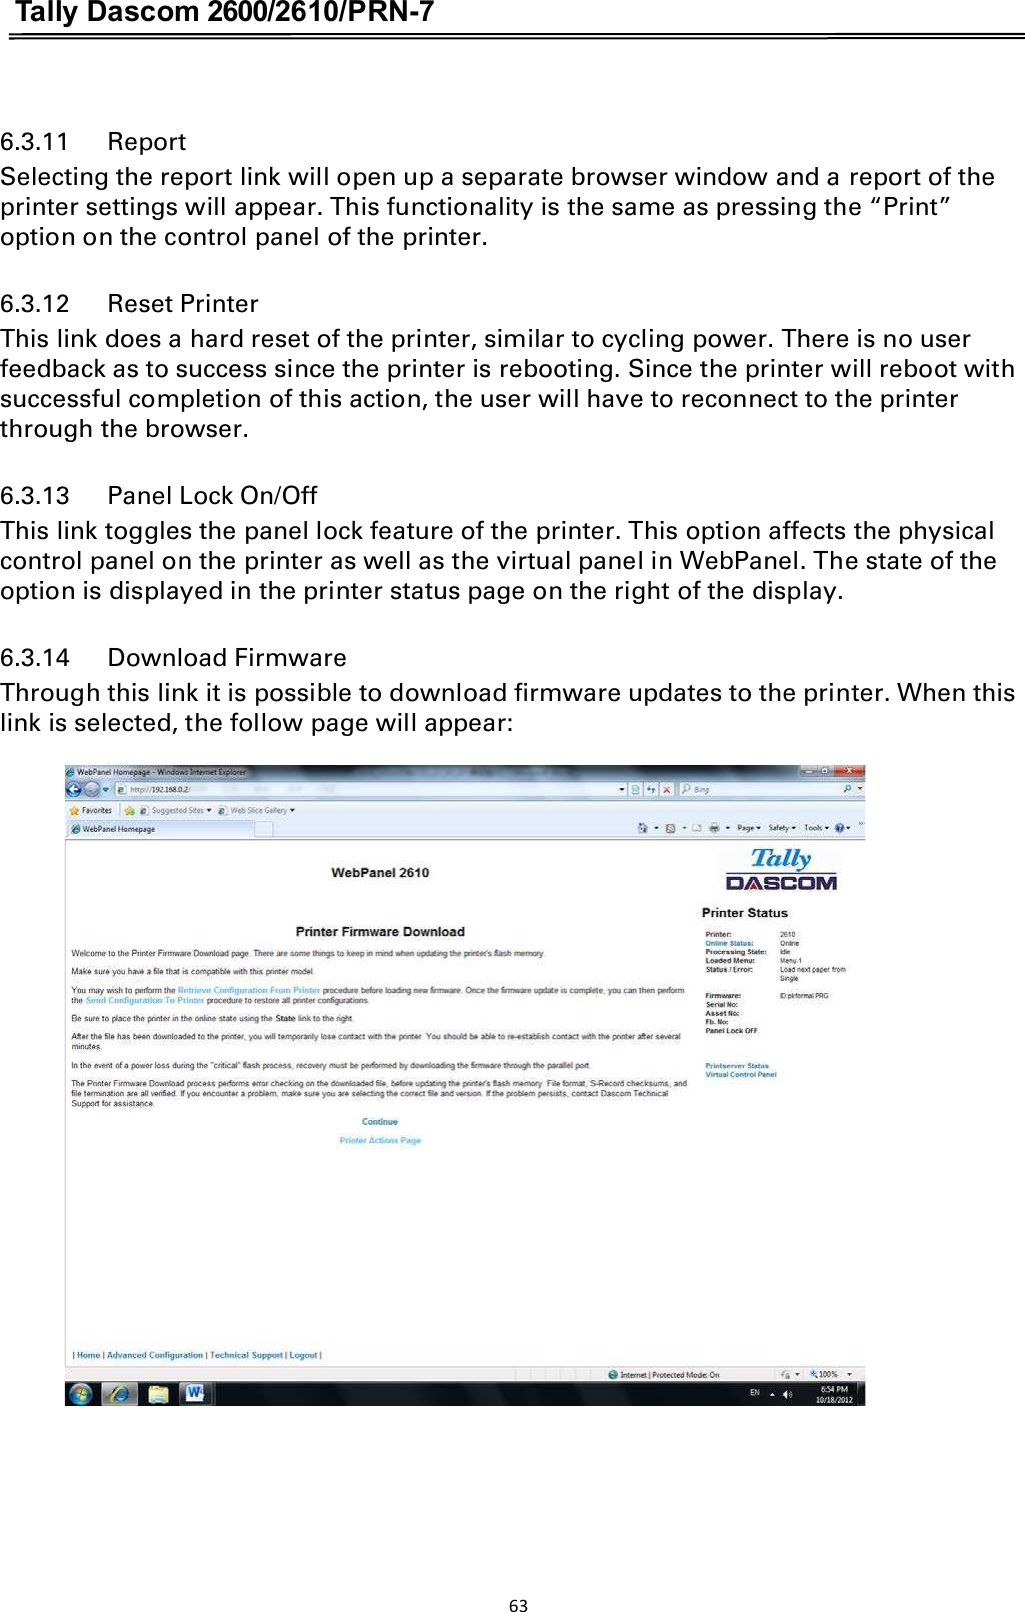 Tally Dascom 2600/2610/PRN-7  6.3.11      Report Selecting the report link will open up a separate browser window and a report of the printer settings will appear. This functionality is the same as pressing the “Print” option on the control panel of the printer. 6.3.12      Reset Printer This link does a hard reset of the printer, similar to cycling power. There is no user feedback as to success since the printer is rebooting. Since the printer will reboot with successful completion of this action, the user will have to reconnect to the printer through the browser. 6.3.13      Panel Lock On/Off This link toggles the panel lock feature of the printer. This option affects the physical control panel on the printer as well as the virtual panel in WebPanel. The state of the option is displayed in the printer status page on the right of the display. 6.3.14      Download Firmware Through this link it is possible to download firmware updates to the printer. When this link is selected, the follow page will appear: 63  